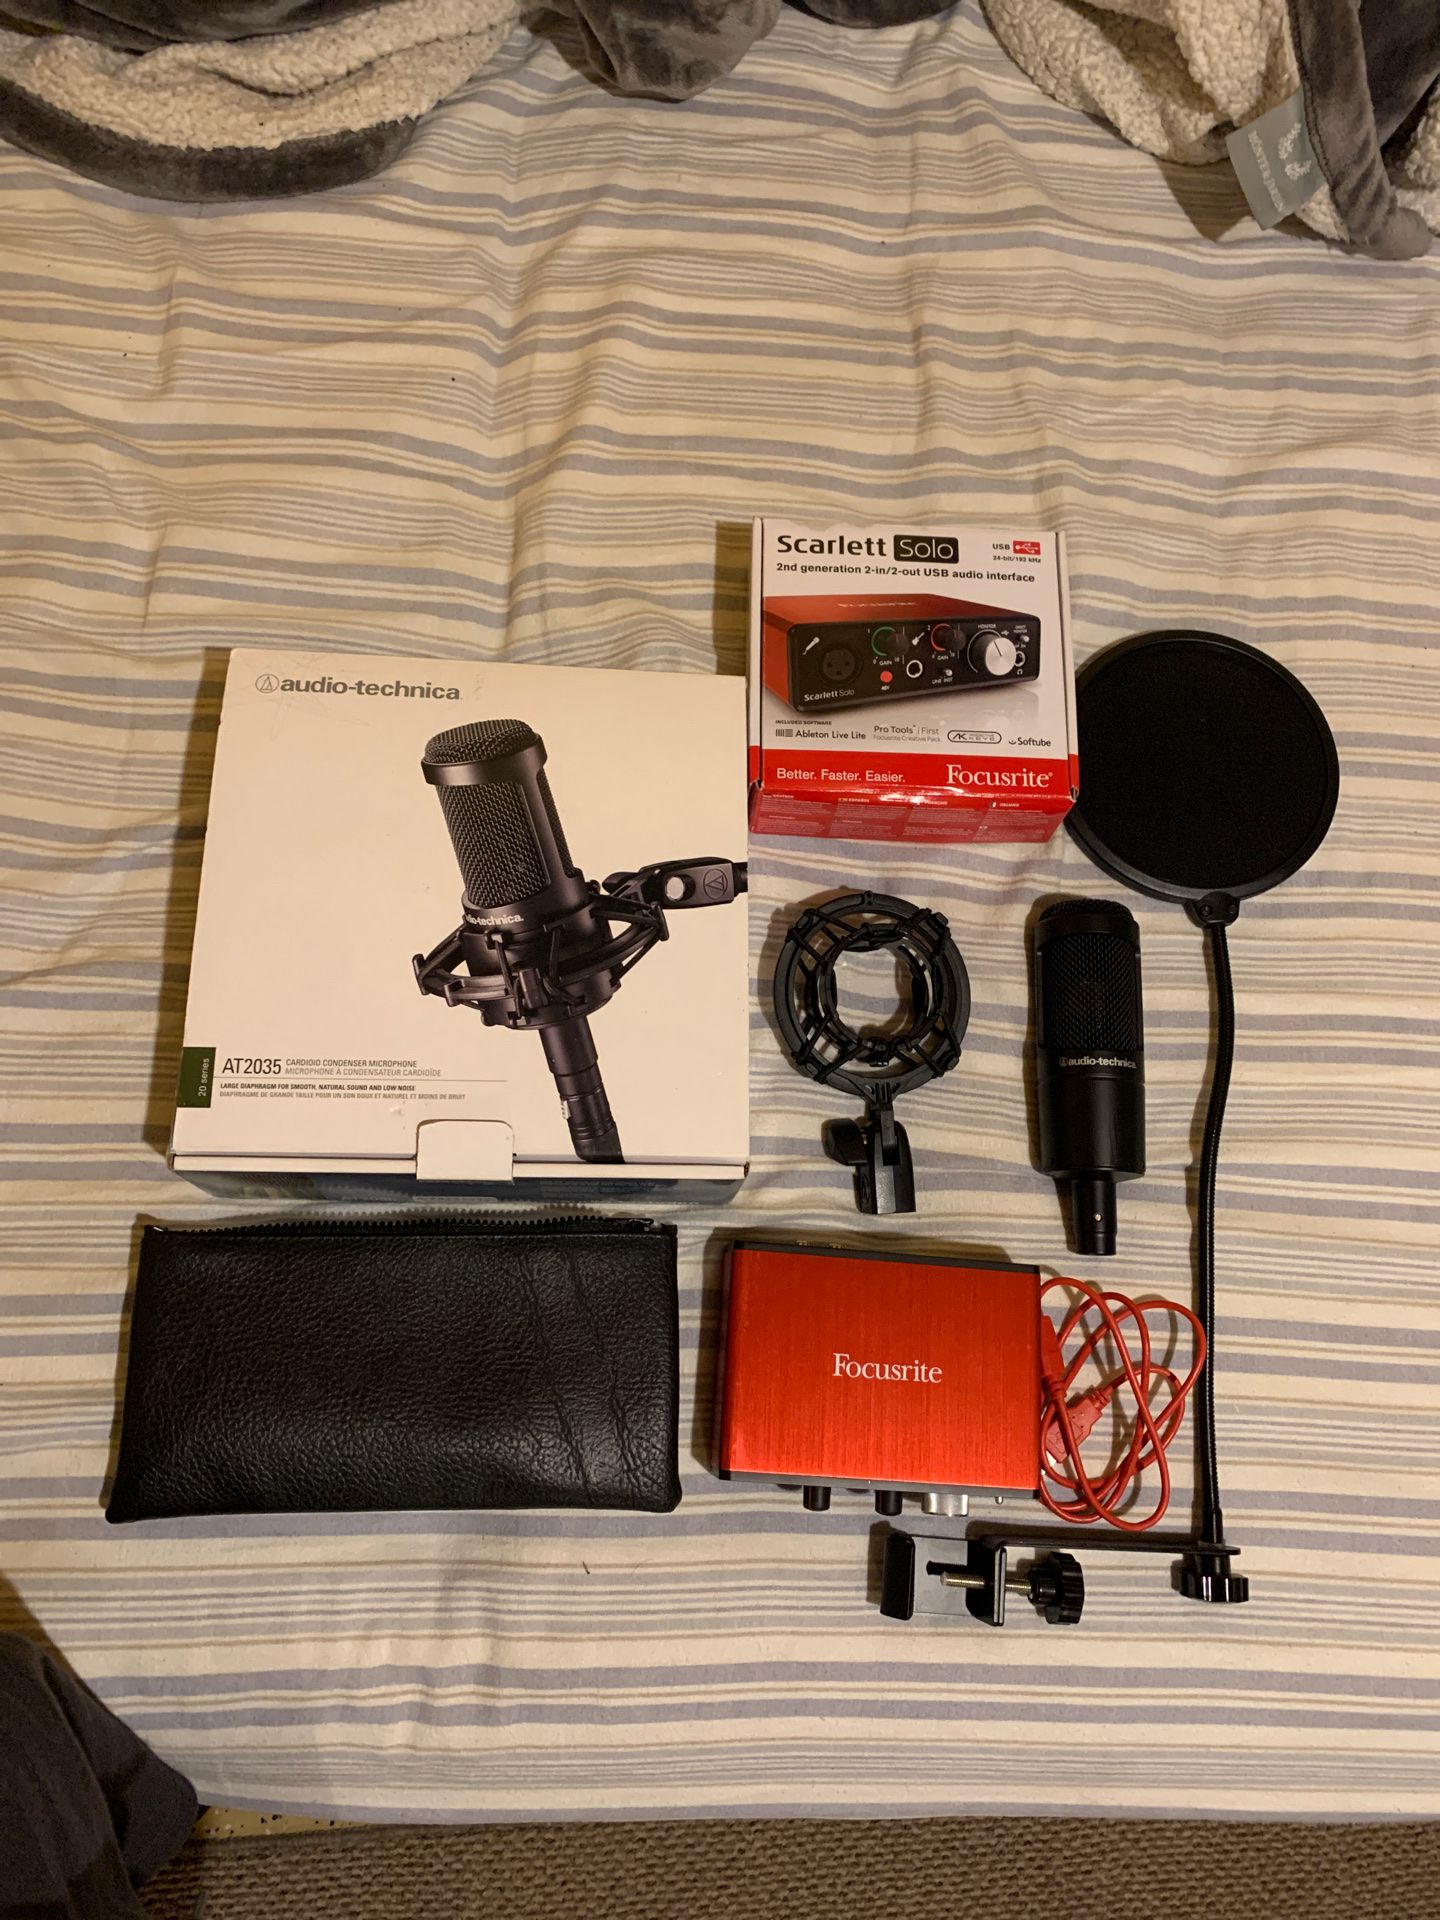 Audio-technica AT2035 microphone w/ Scarlett Solo interface + pop filter